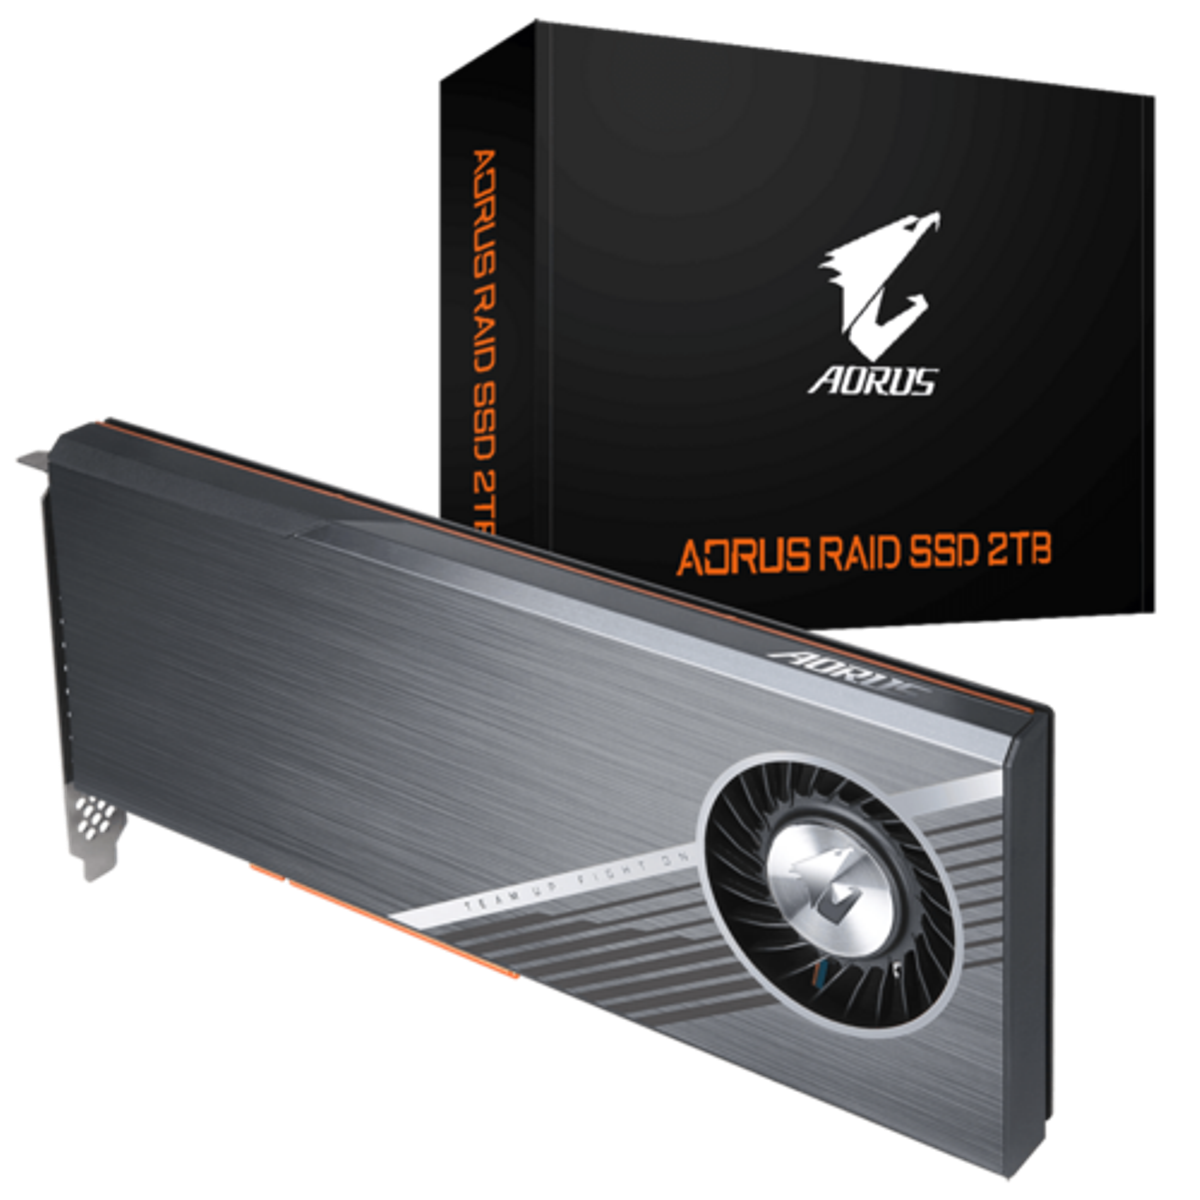 SSD Interne Gigabyte Aorus Raid SSD 2 To - PCI Express 3.0 8x - NVMe 1.3 - Lecture sequentielle : 6300 Mo/s - Ecriture sequentielle : 6000 Mo/s